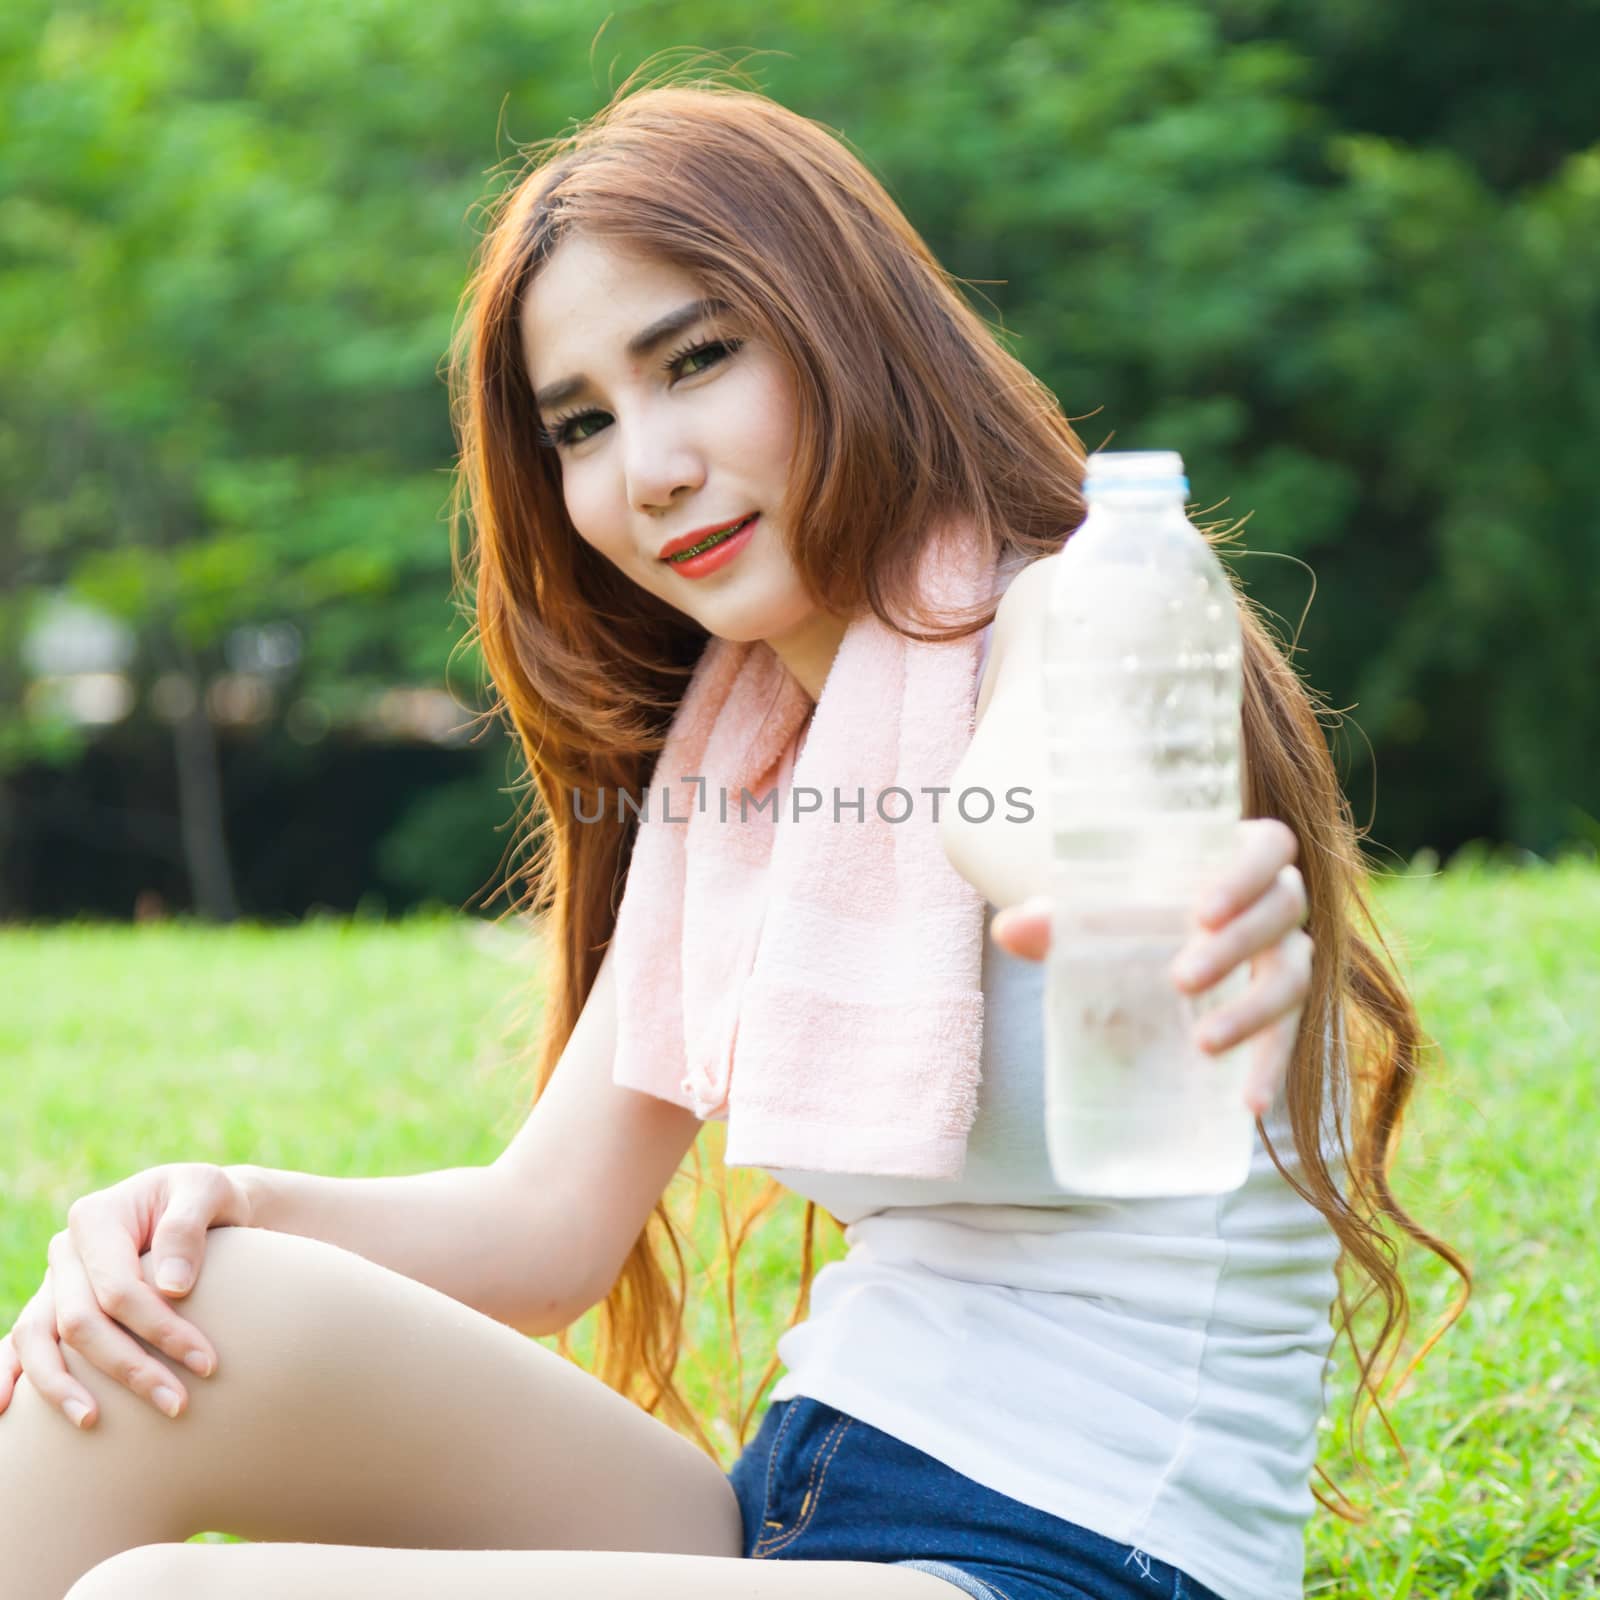 Women held a water bottle to drink. Sit on the lawn after exercise in park.